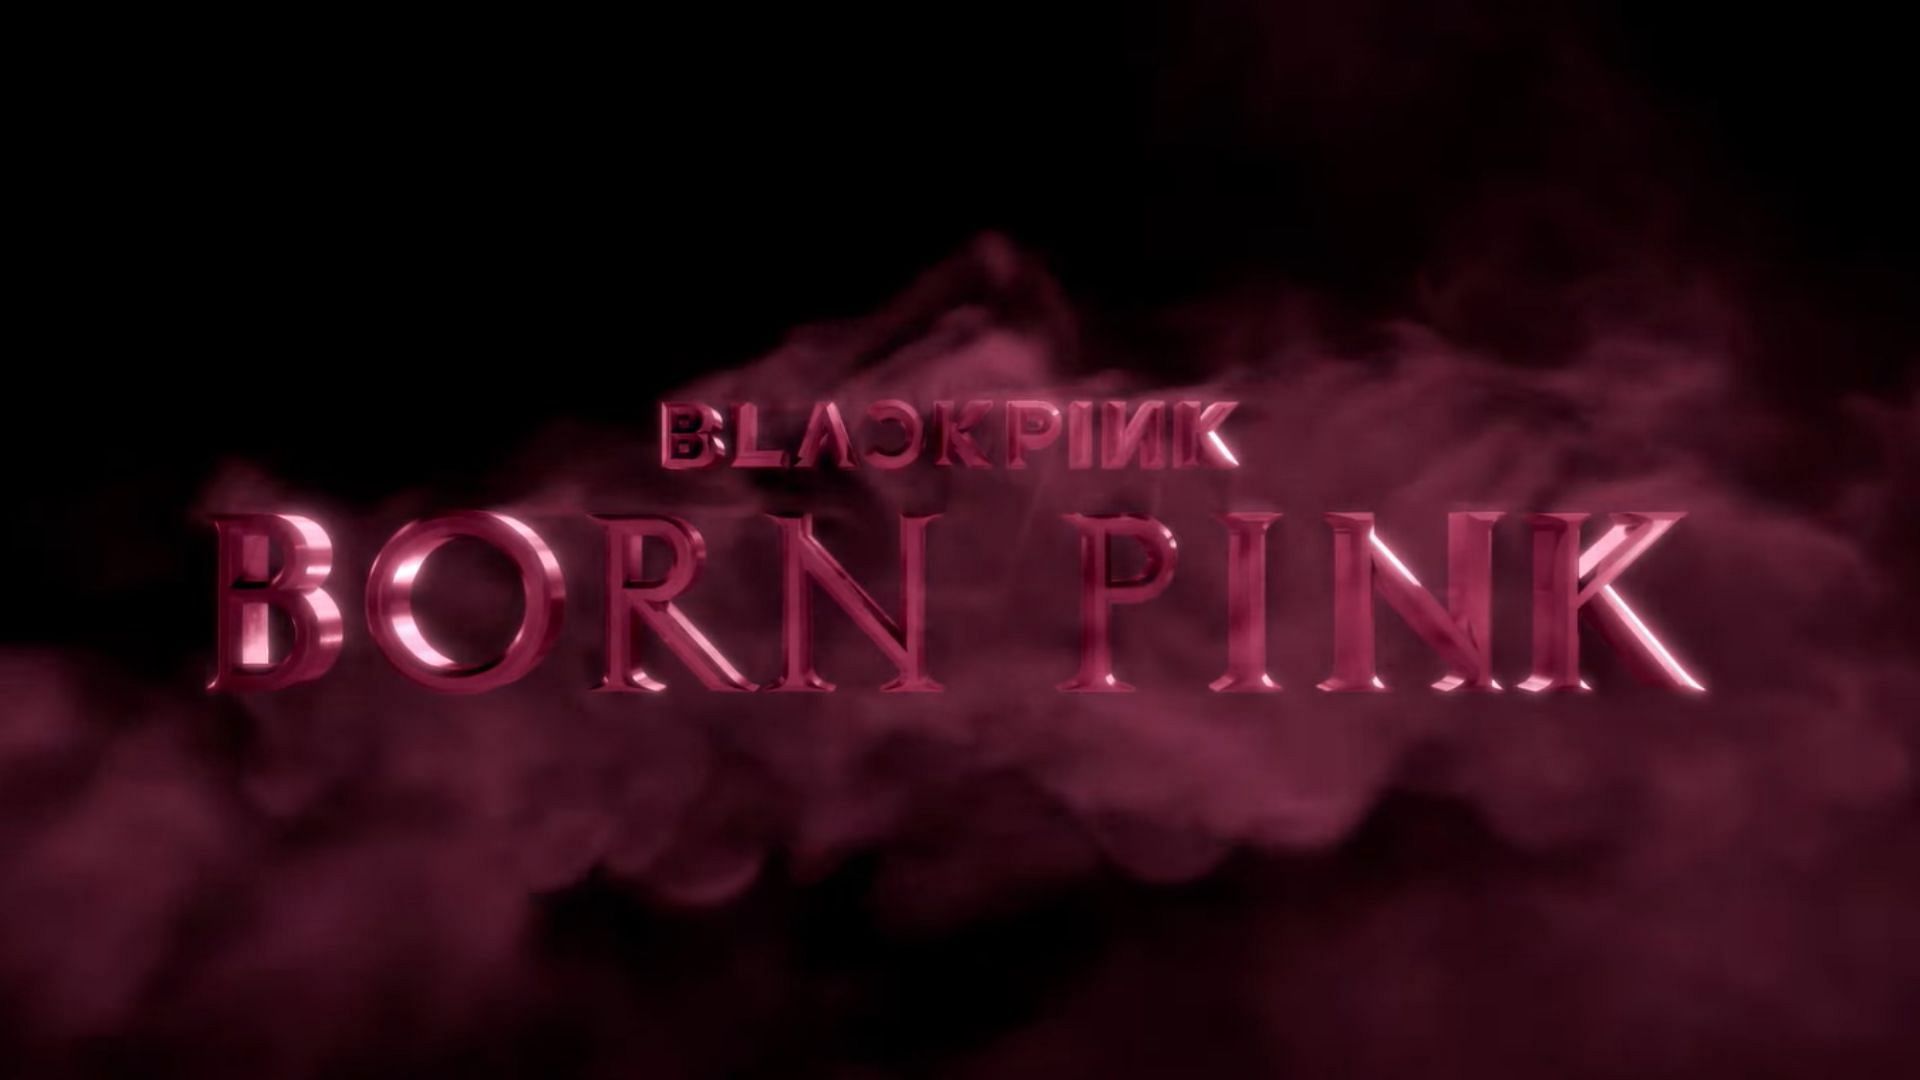 BLACKPINK announces comeback with BORN PINK, fans say 'no more